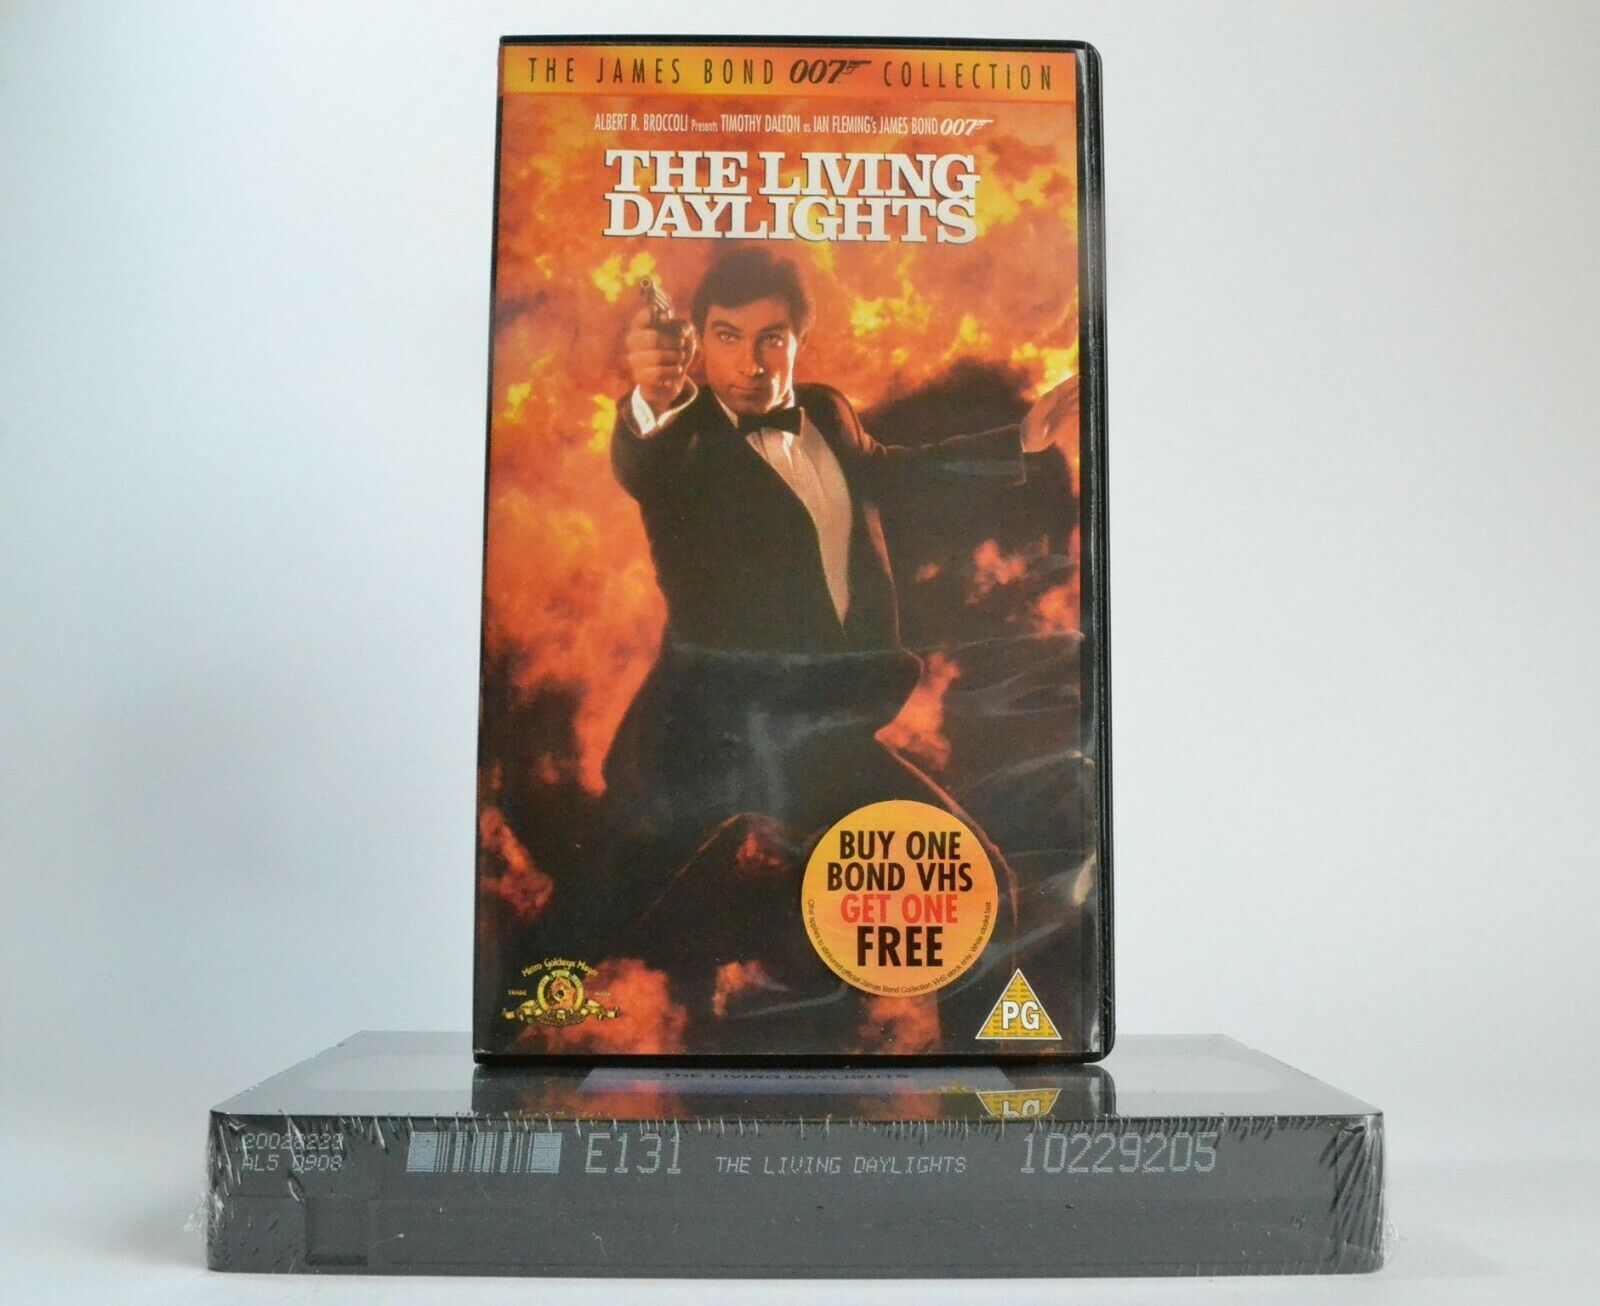 The Living Daylights (1987) [James Bond Collection] - Brand New Sealed - Pal VHS-